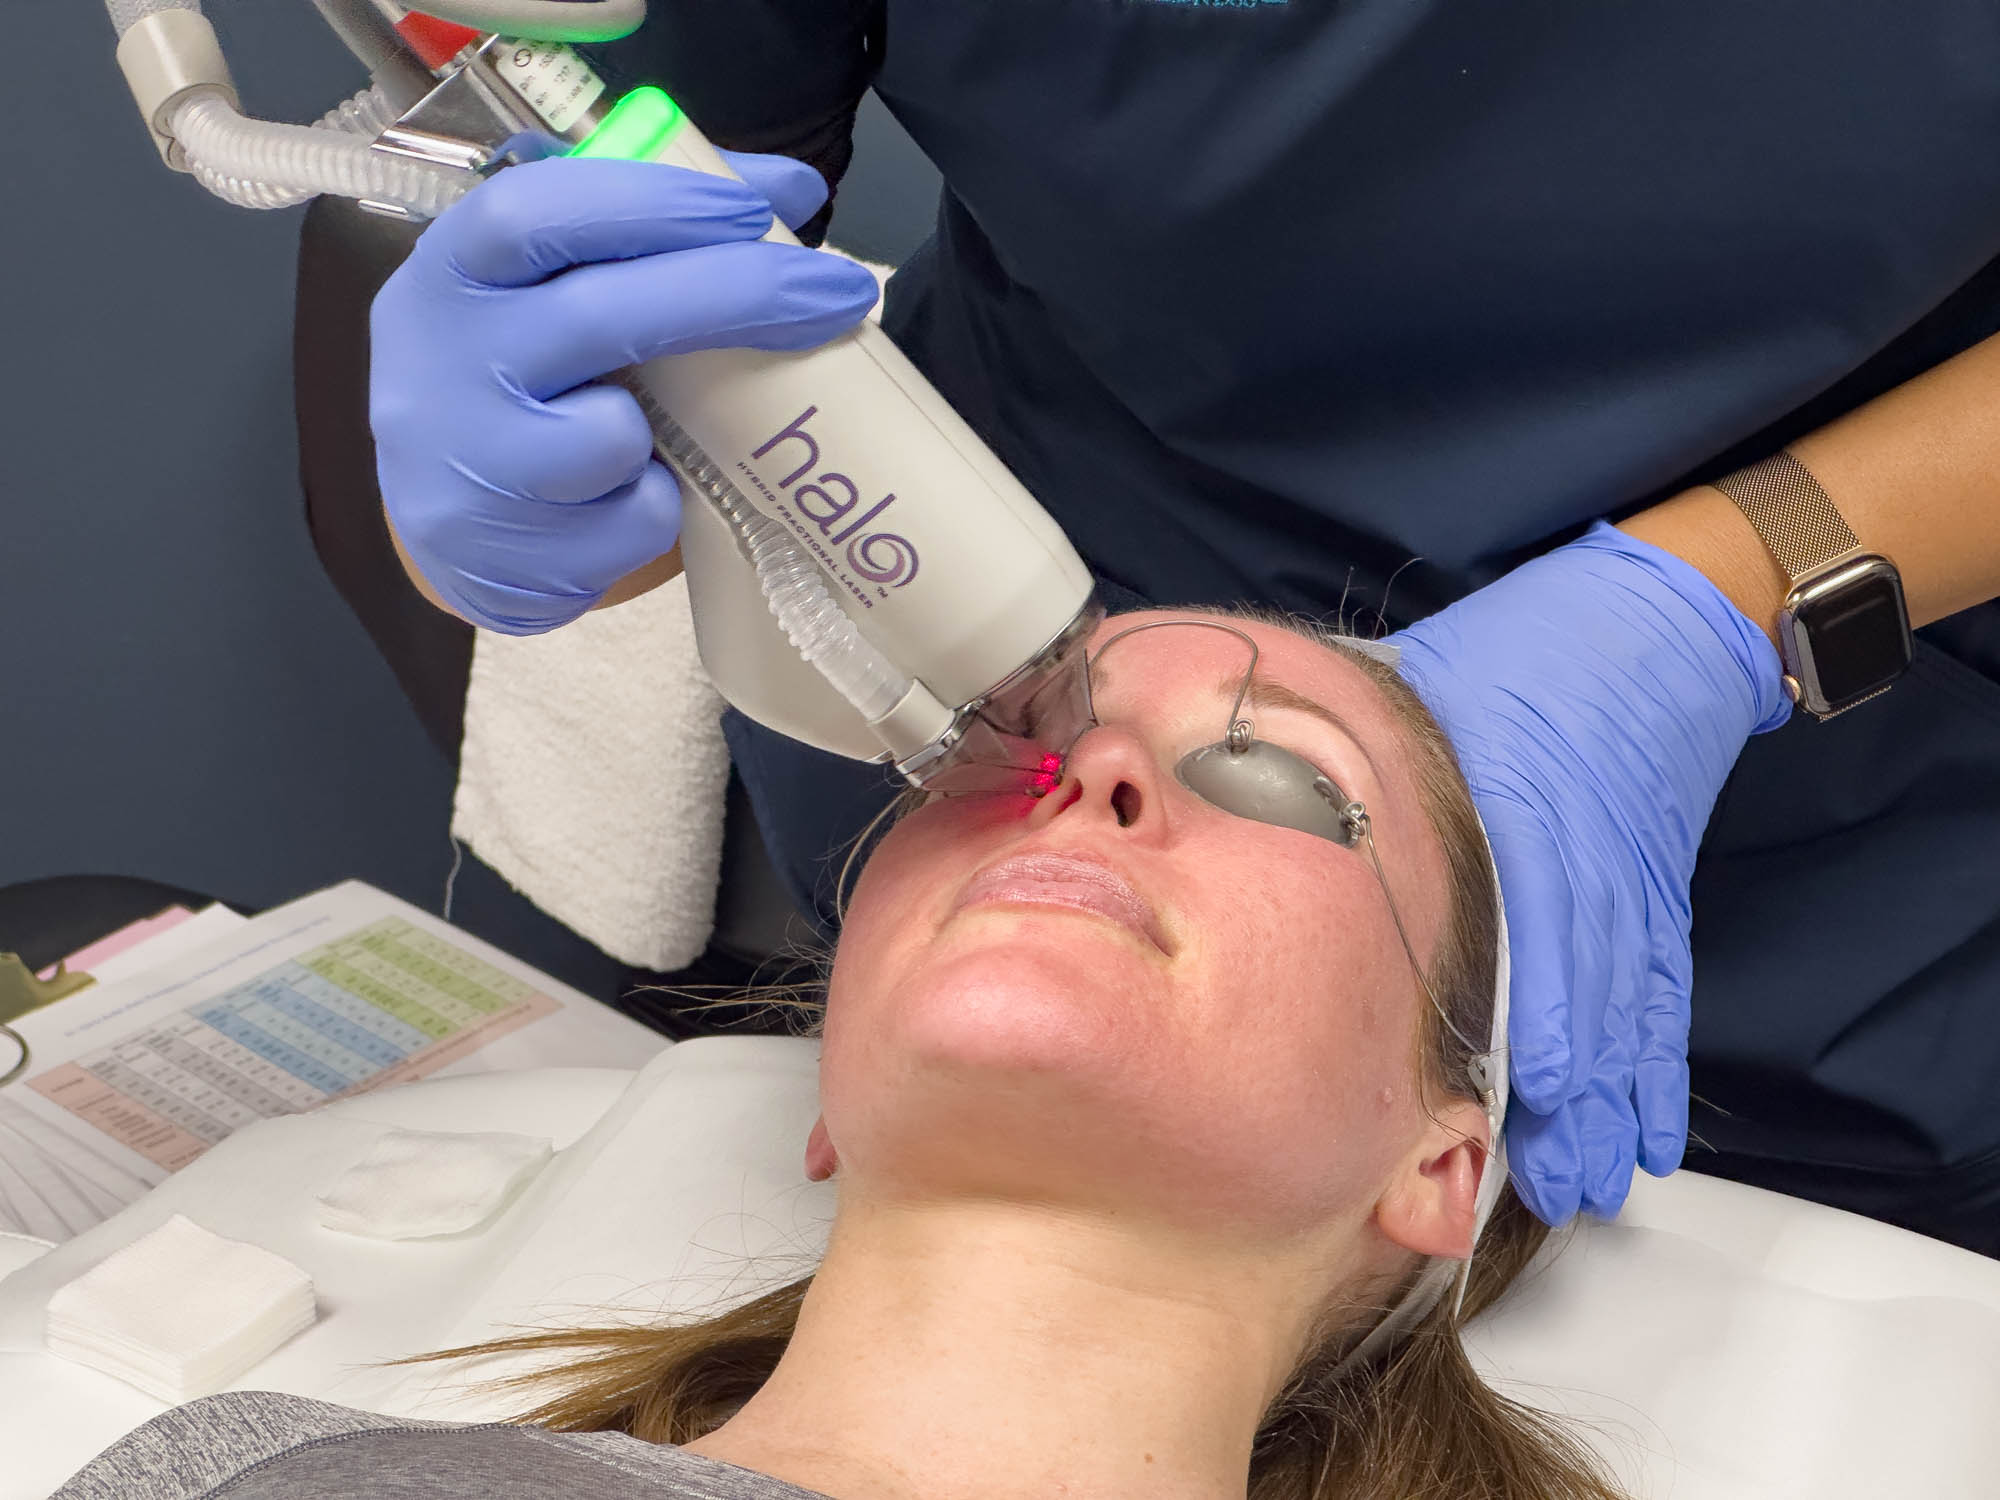 Marcos Medical provider uses the Halo laser treatment on the outside of patient's right nostril. Provider's face is not visible. Patient wears protective eye covering.